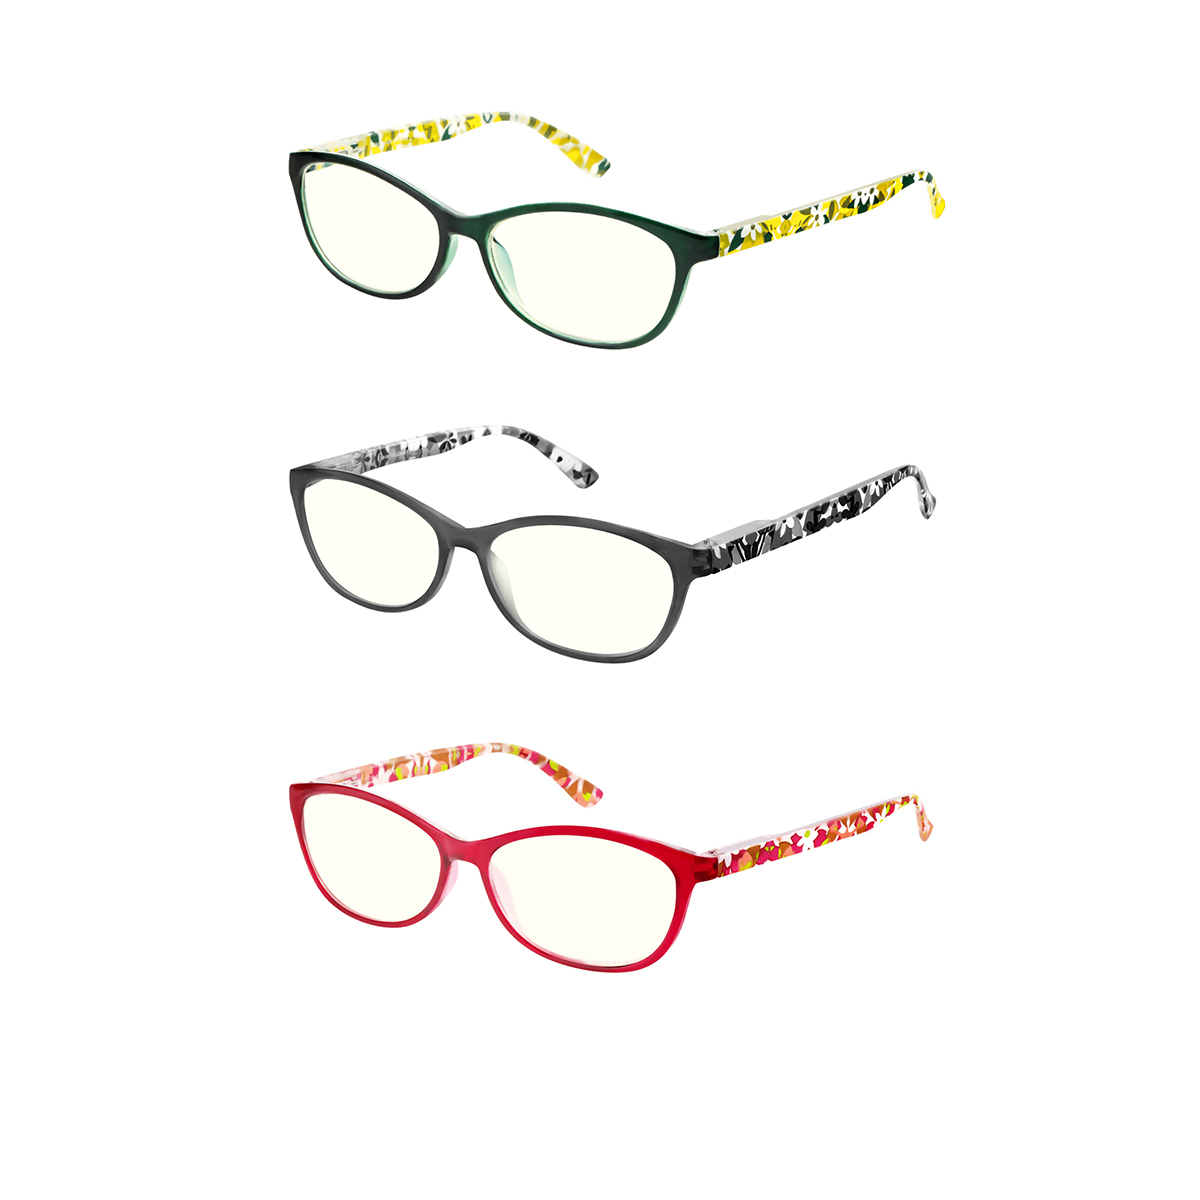 Reading Glasses Collection Zoey $12.99/Set